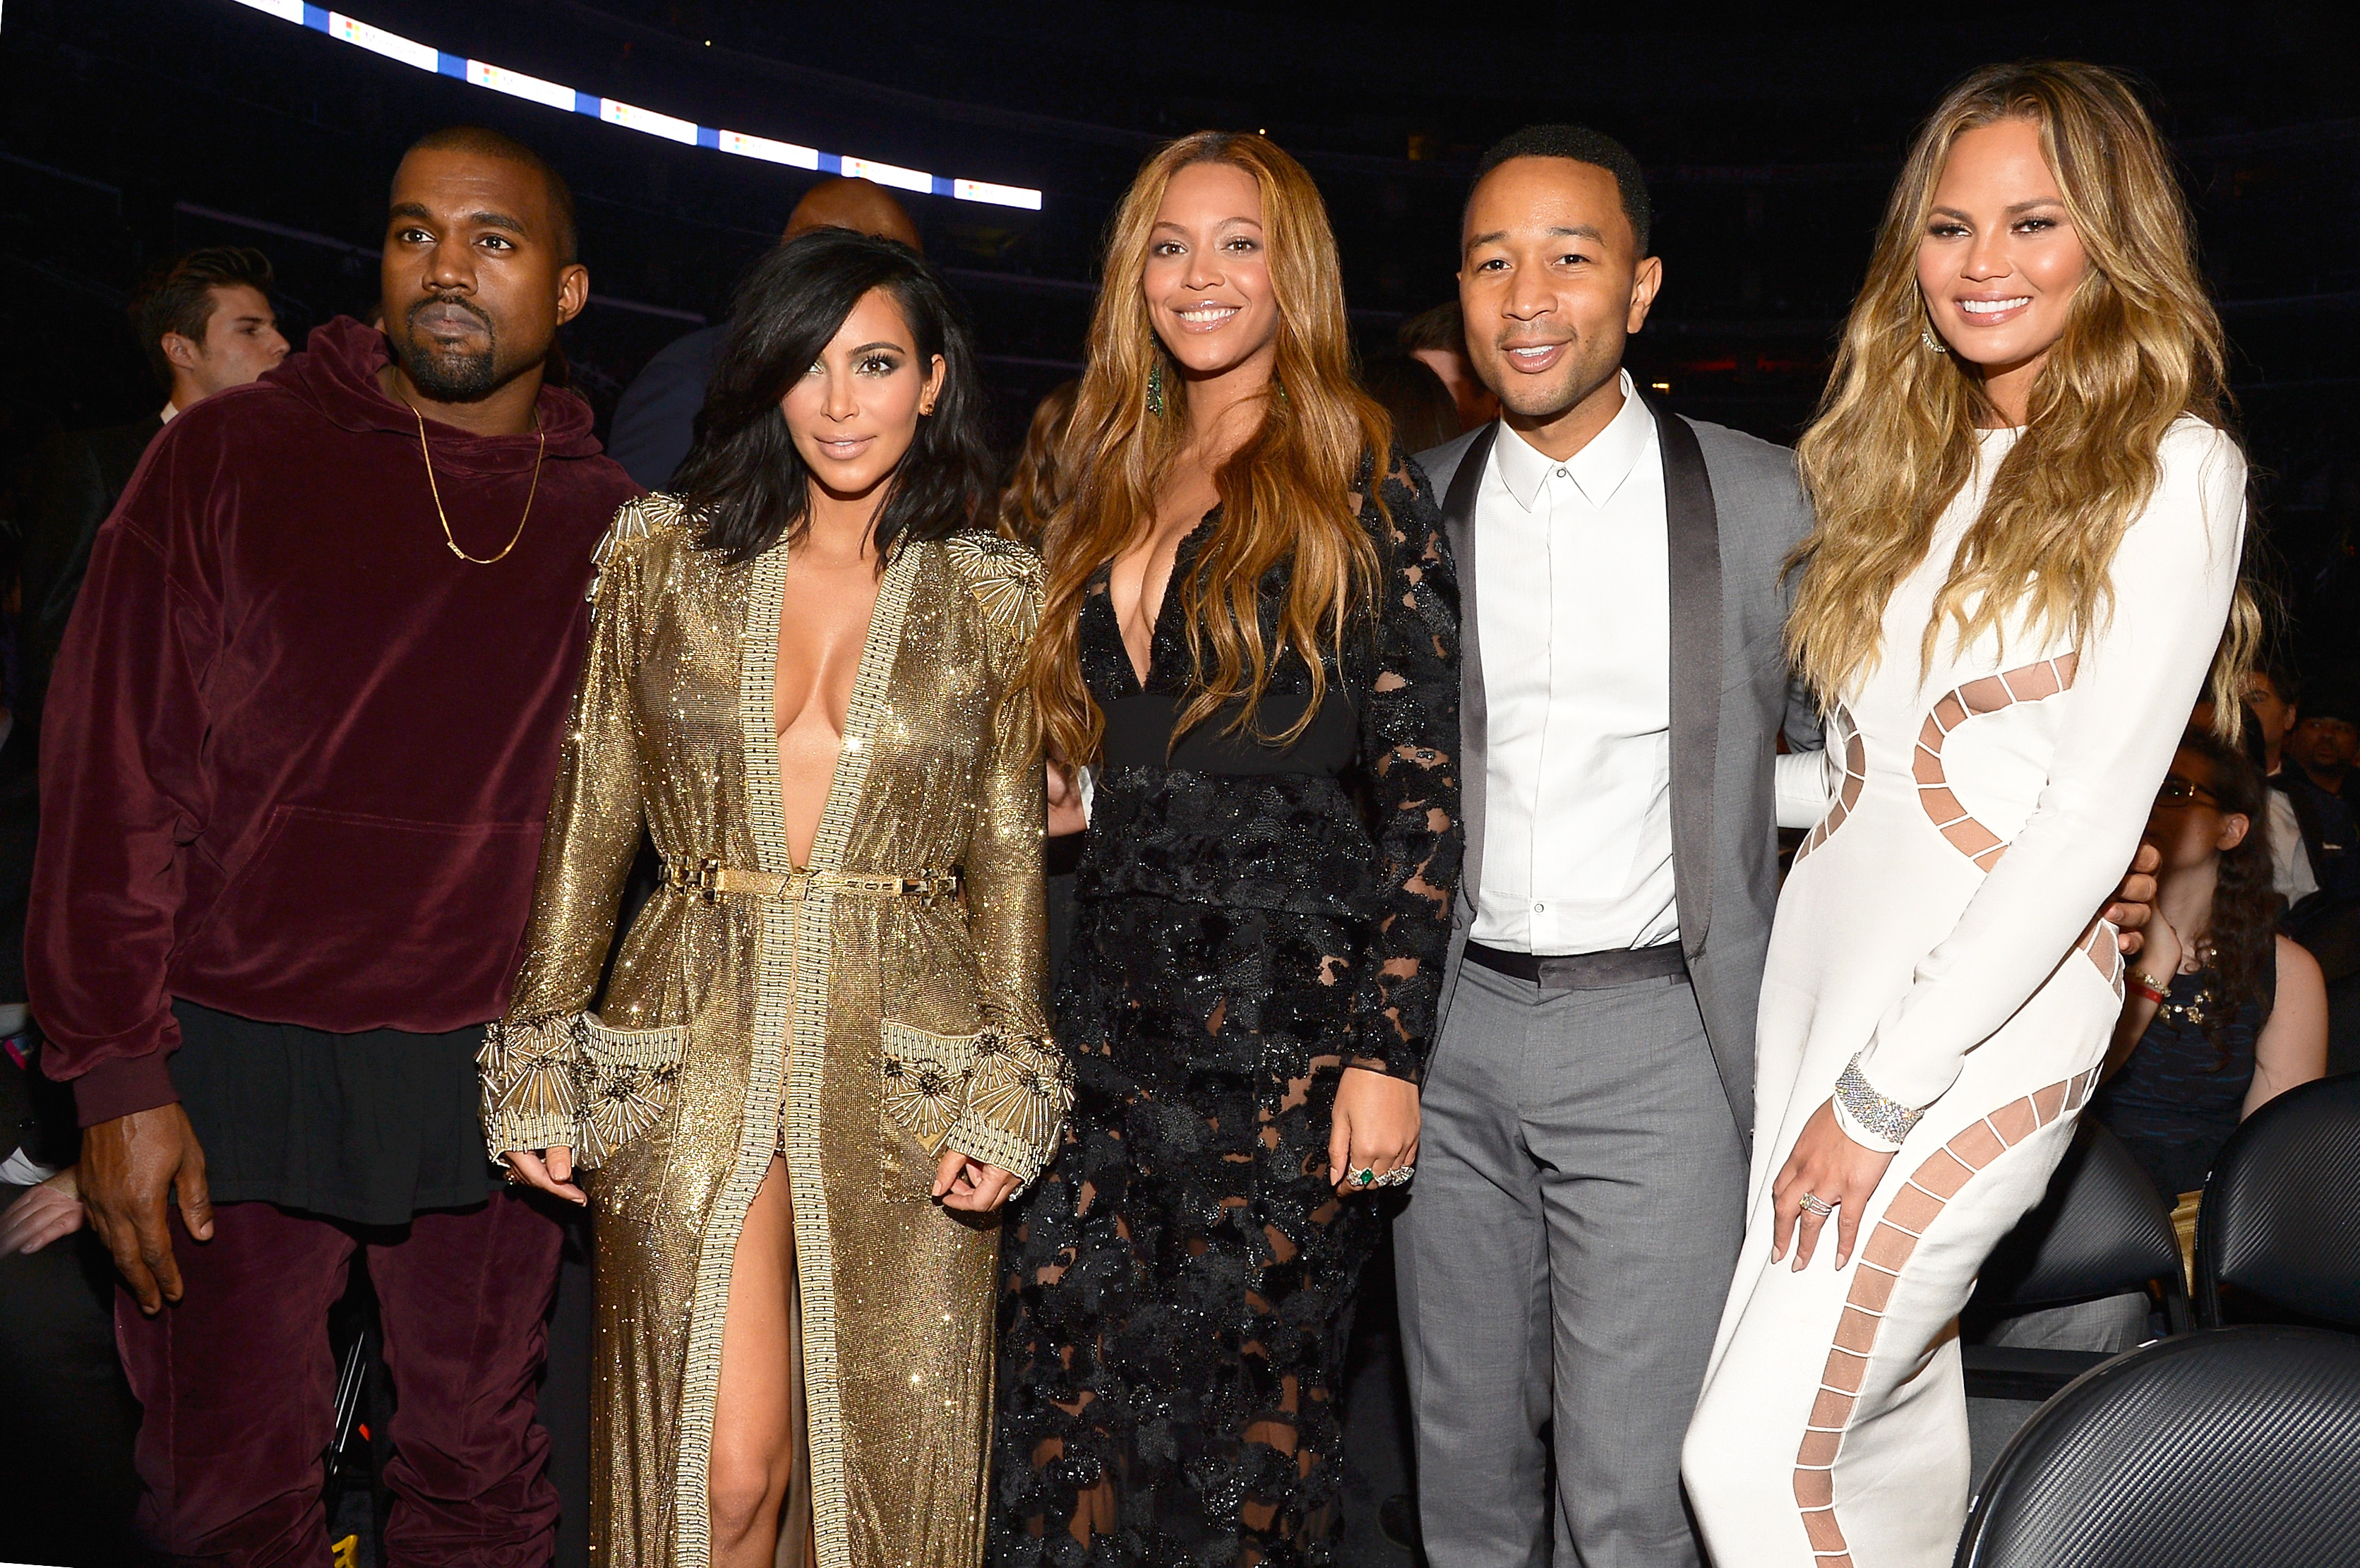 LOS ANGELES, CA - FEBRUARY 08: (L-R) Kanye West, Kim Kardashian, Beyonce, John Legend and Chrissy Teigen during The 57th Annual GRAMMY Awards at the STAPLES Center on February 8, 2015 in Los Angeles, California. (Photo by Lester Cohen/WireImage)